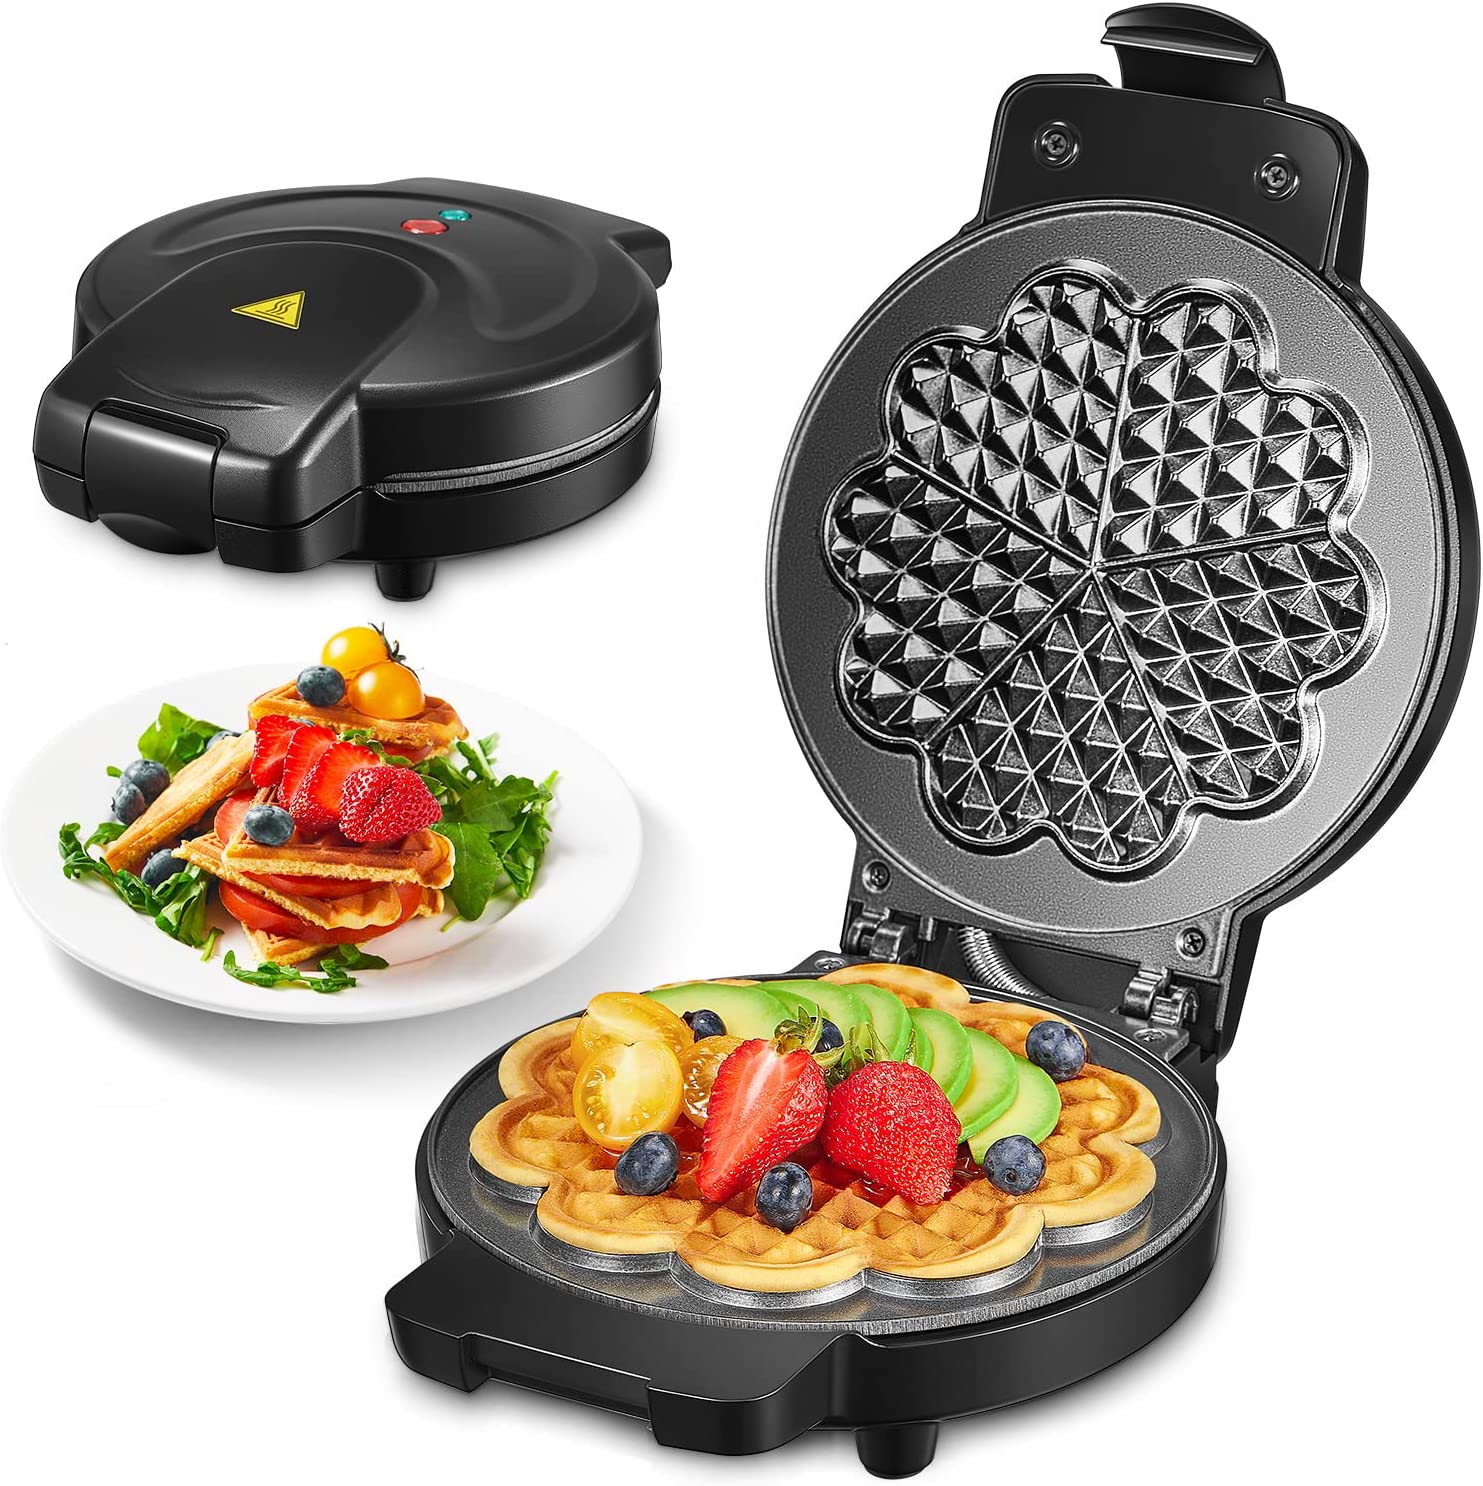 FOHERE Waffle Iron, Heart Shape, 900 W, Waffle Maker with Non-Stick Coating, Waffle Size 15.5 cm, Optical Ready-to-Message, Classic Heart Waffle Iron for Family Parties and Christmas